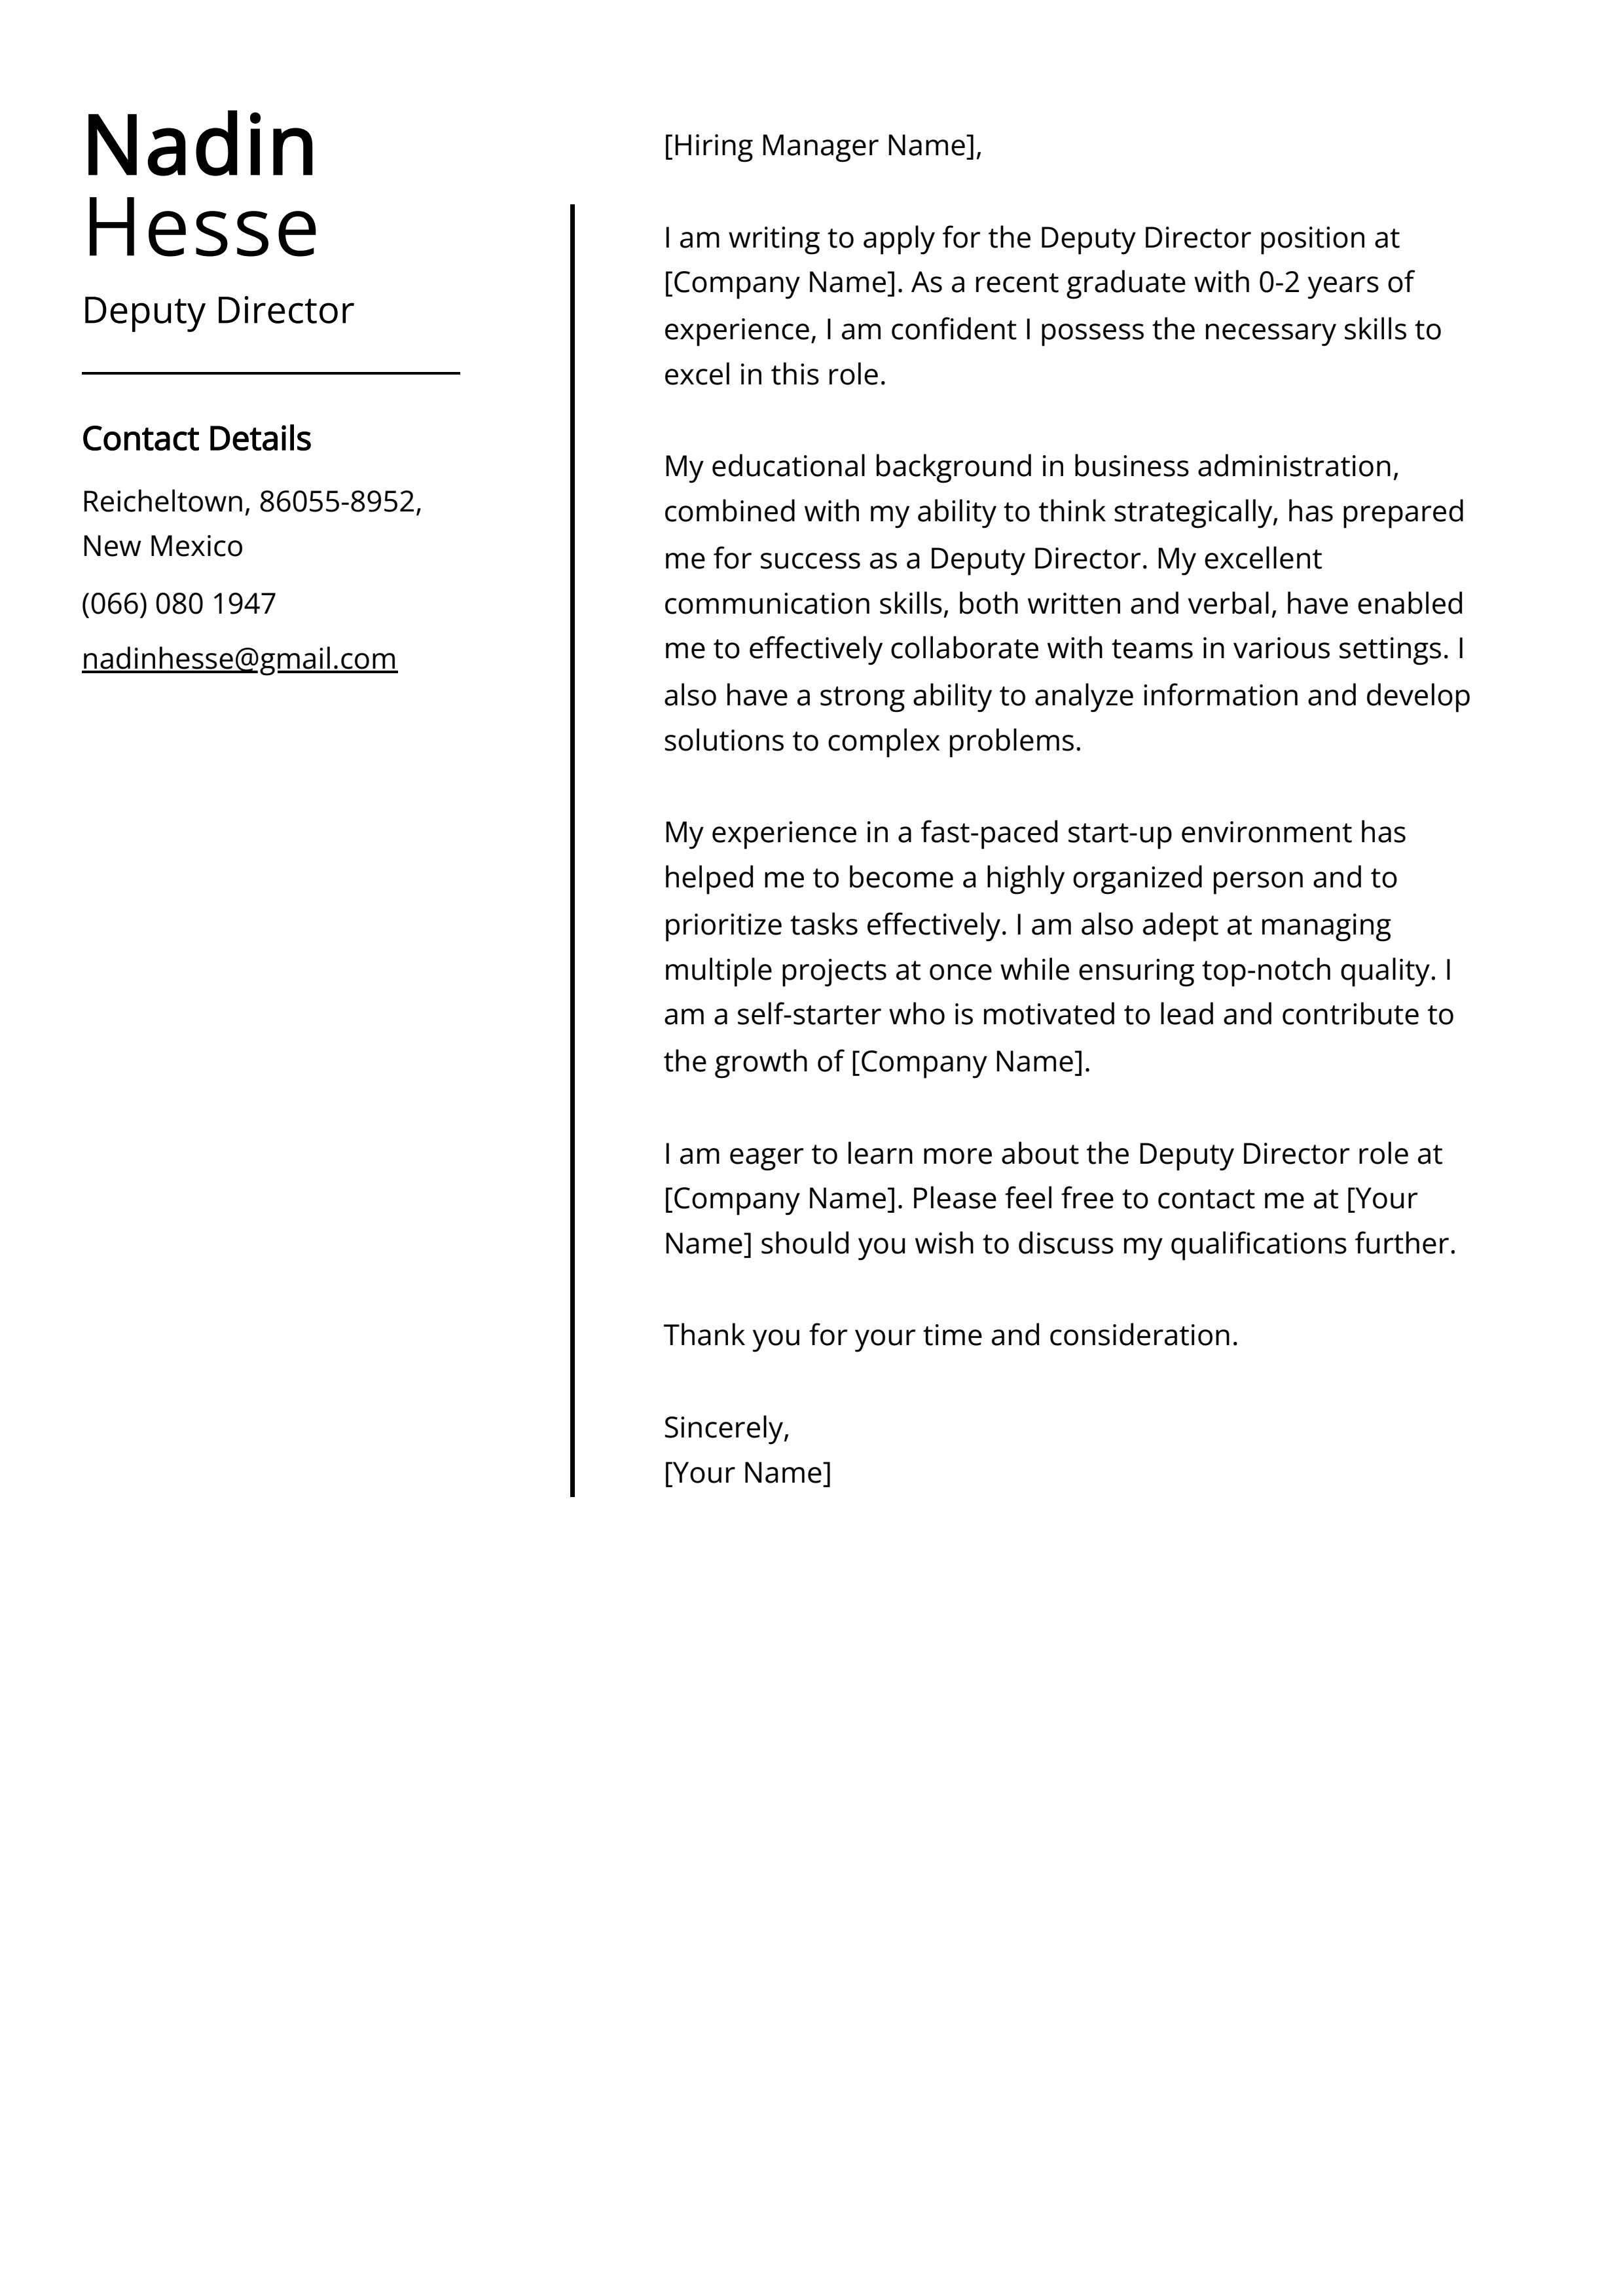 Deputy Director Cover Letter Example